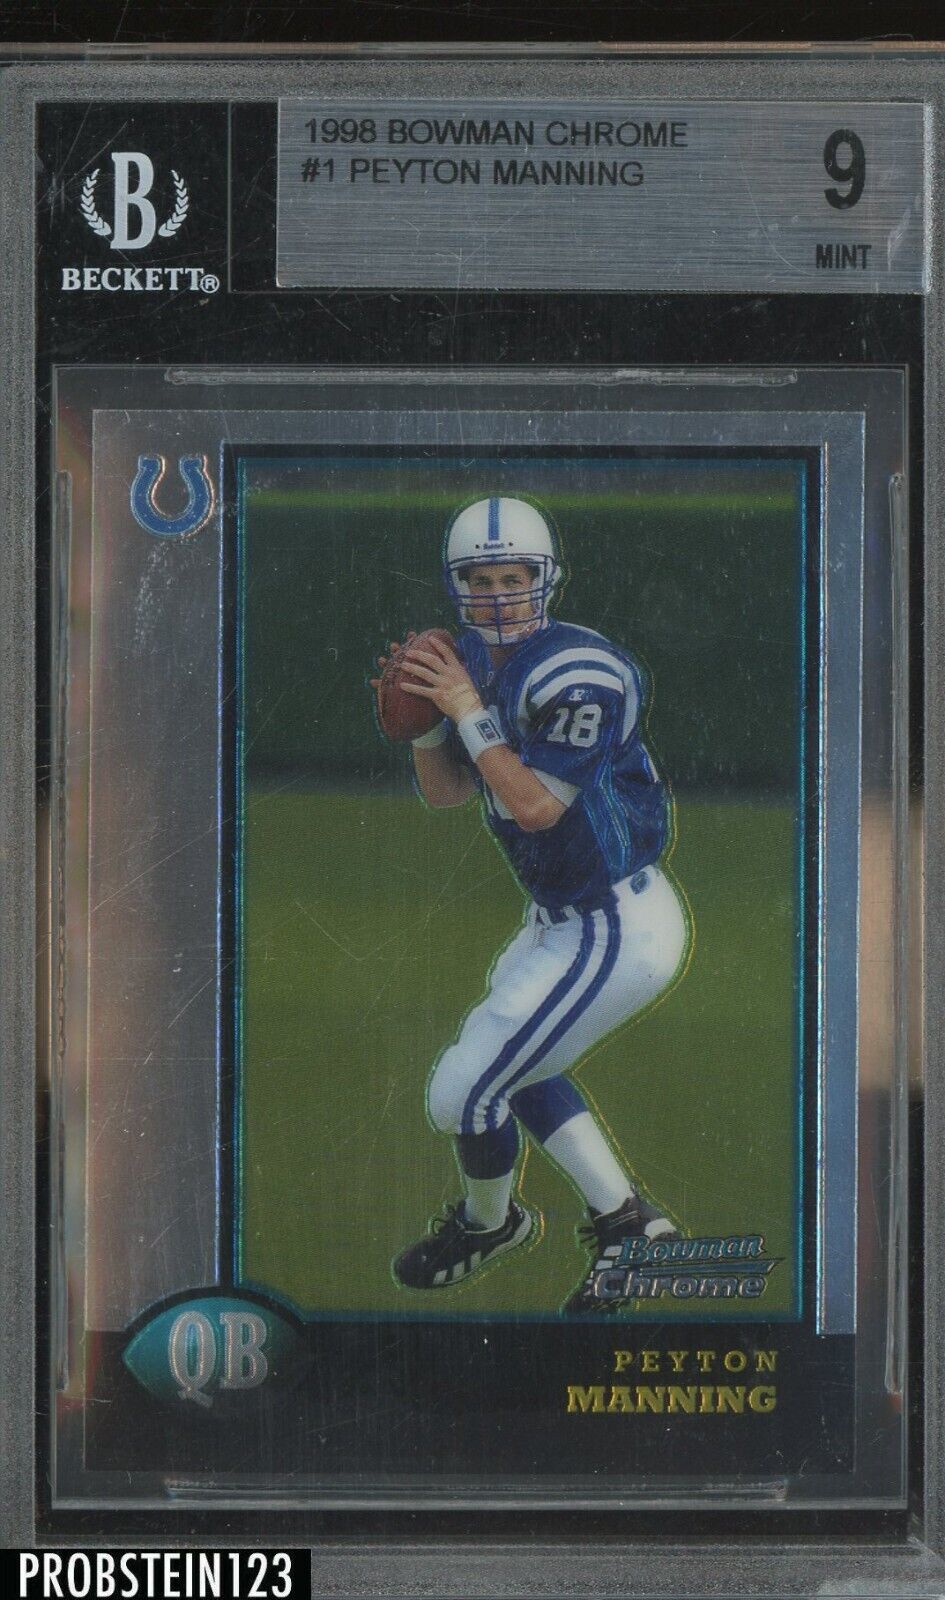 1998 Bowman Chrome #1 Peyton Manning Indianapolis Colts RC Rookie BGS 9 MINT